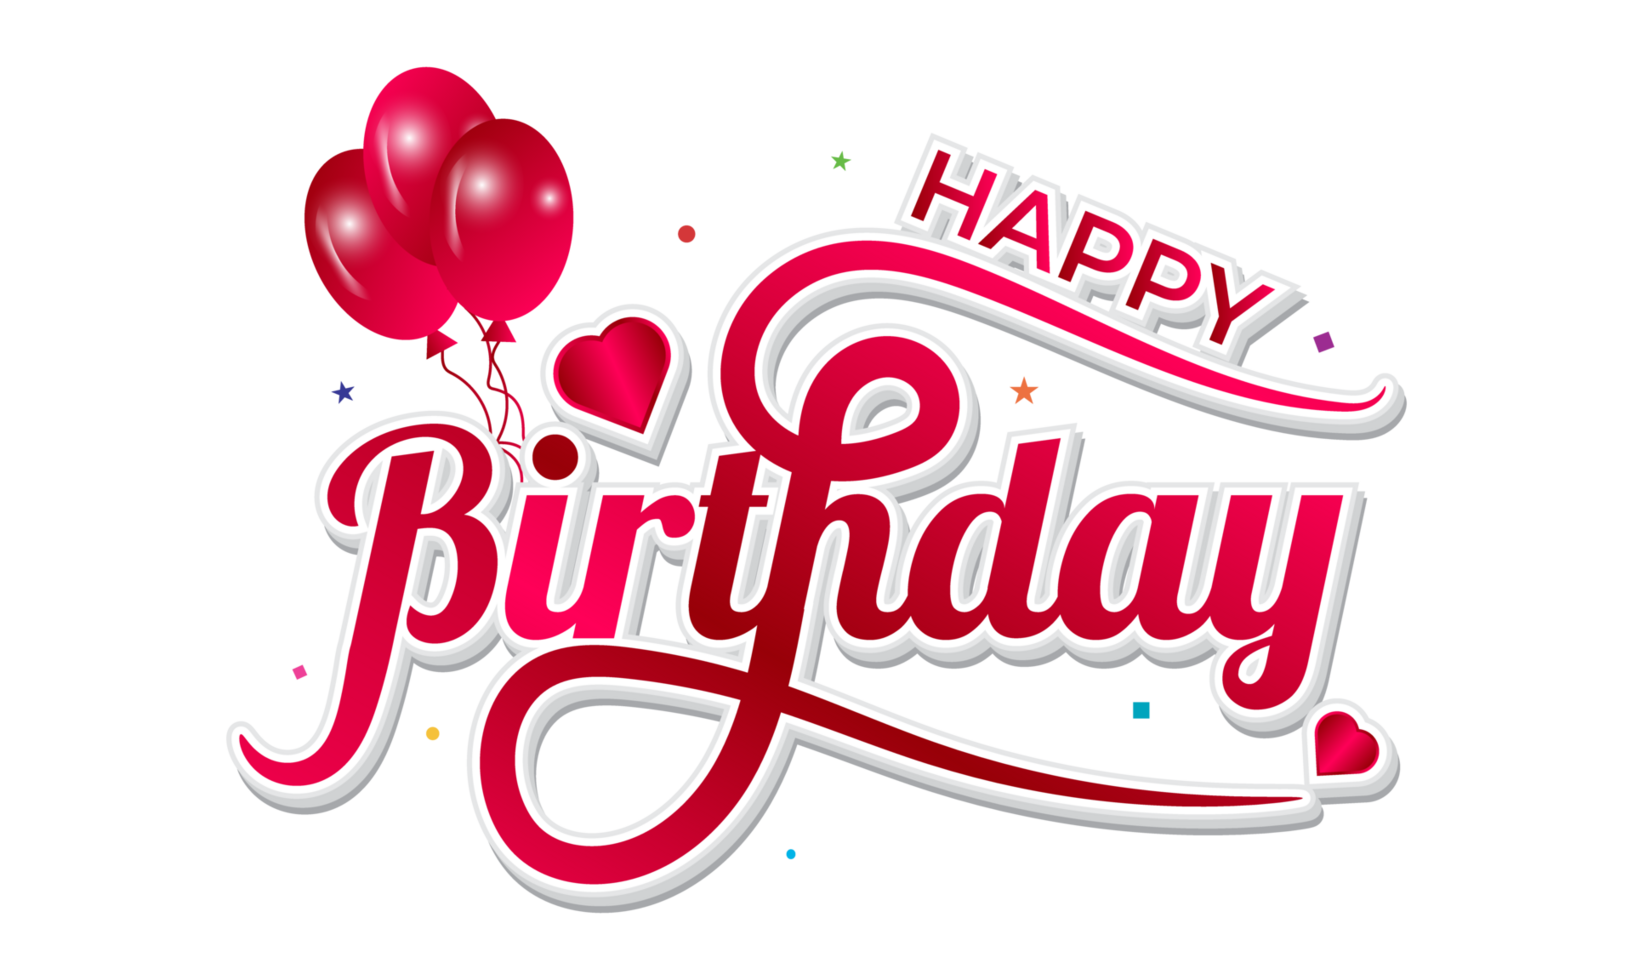 Happy birthday red typography text with balloons and hearts illustration png